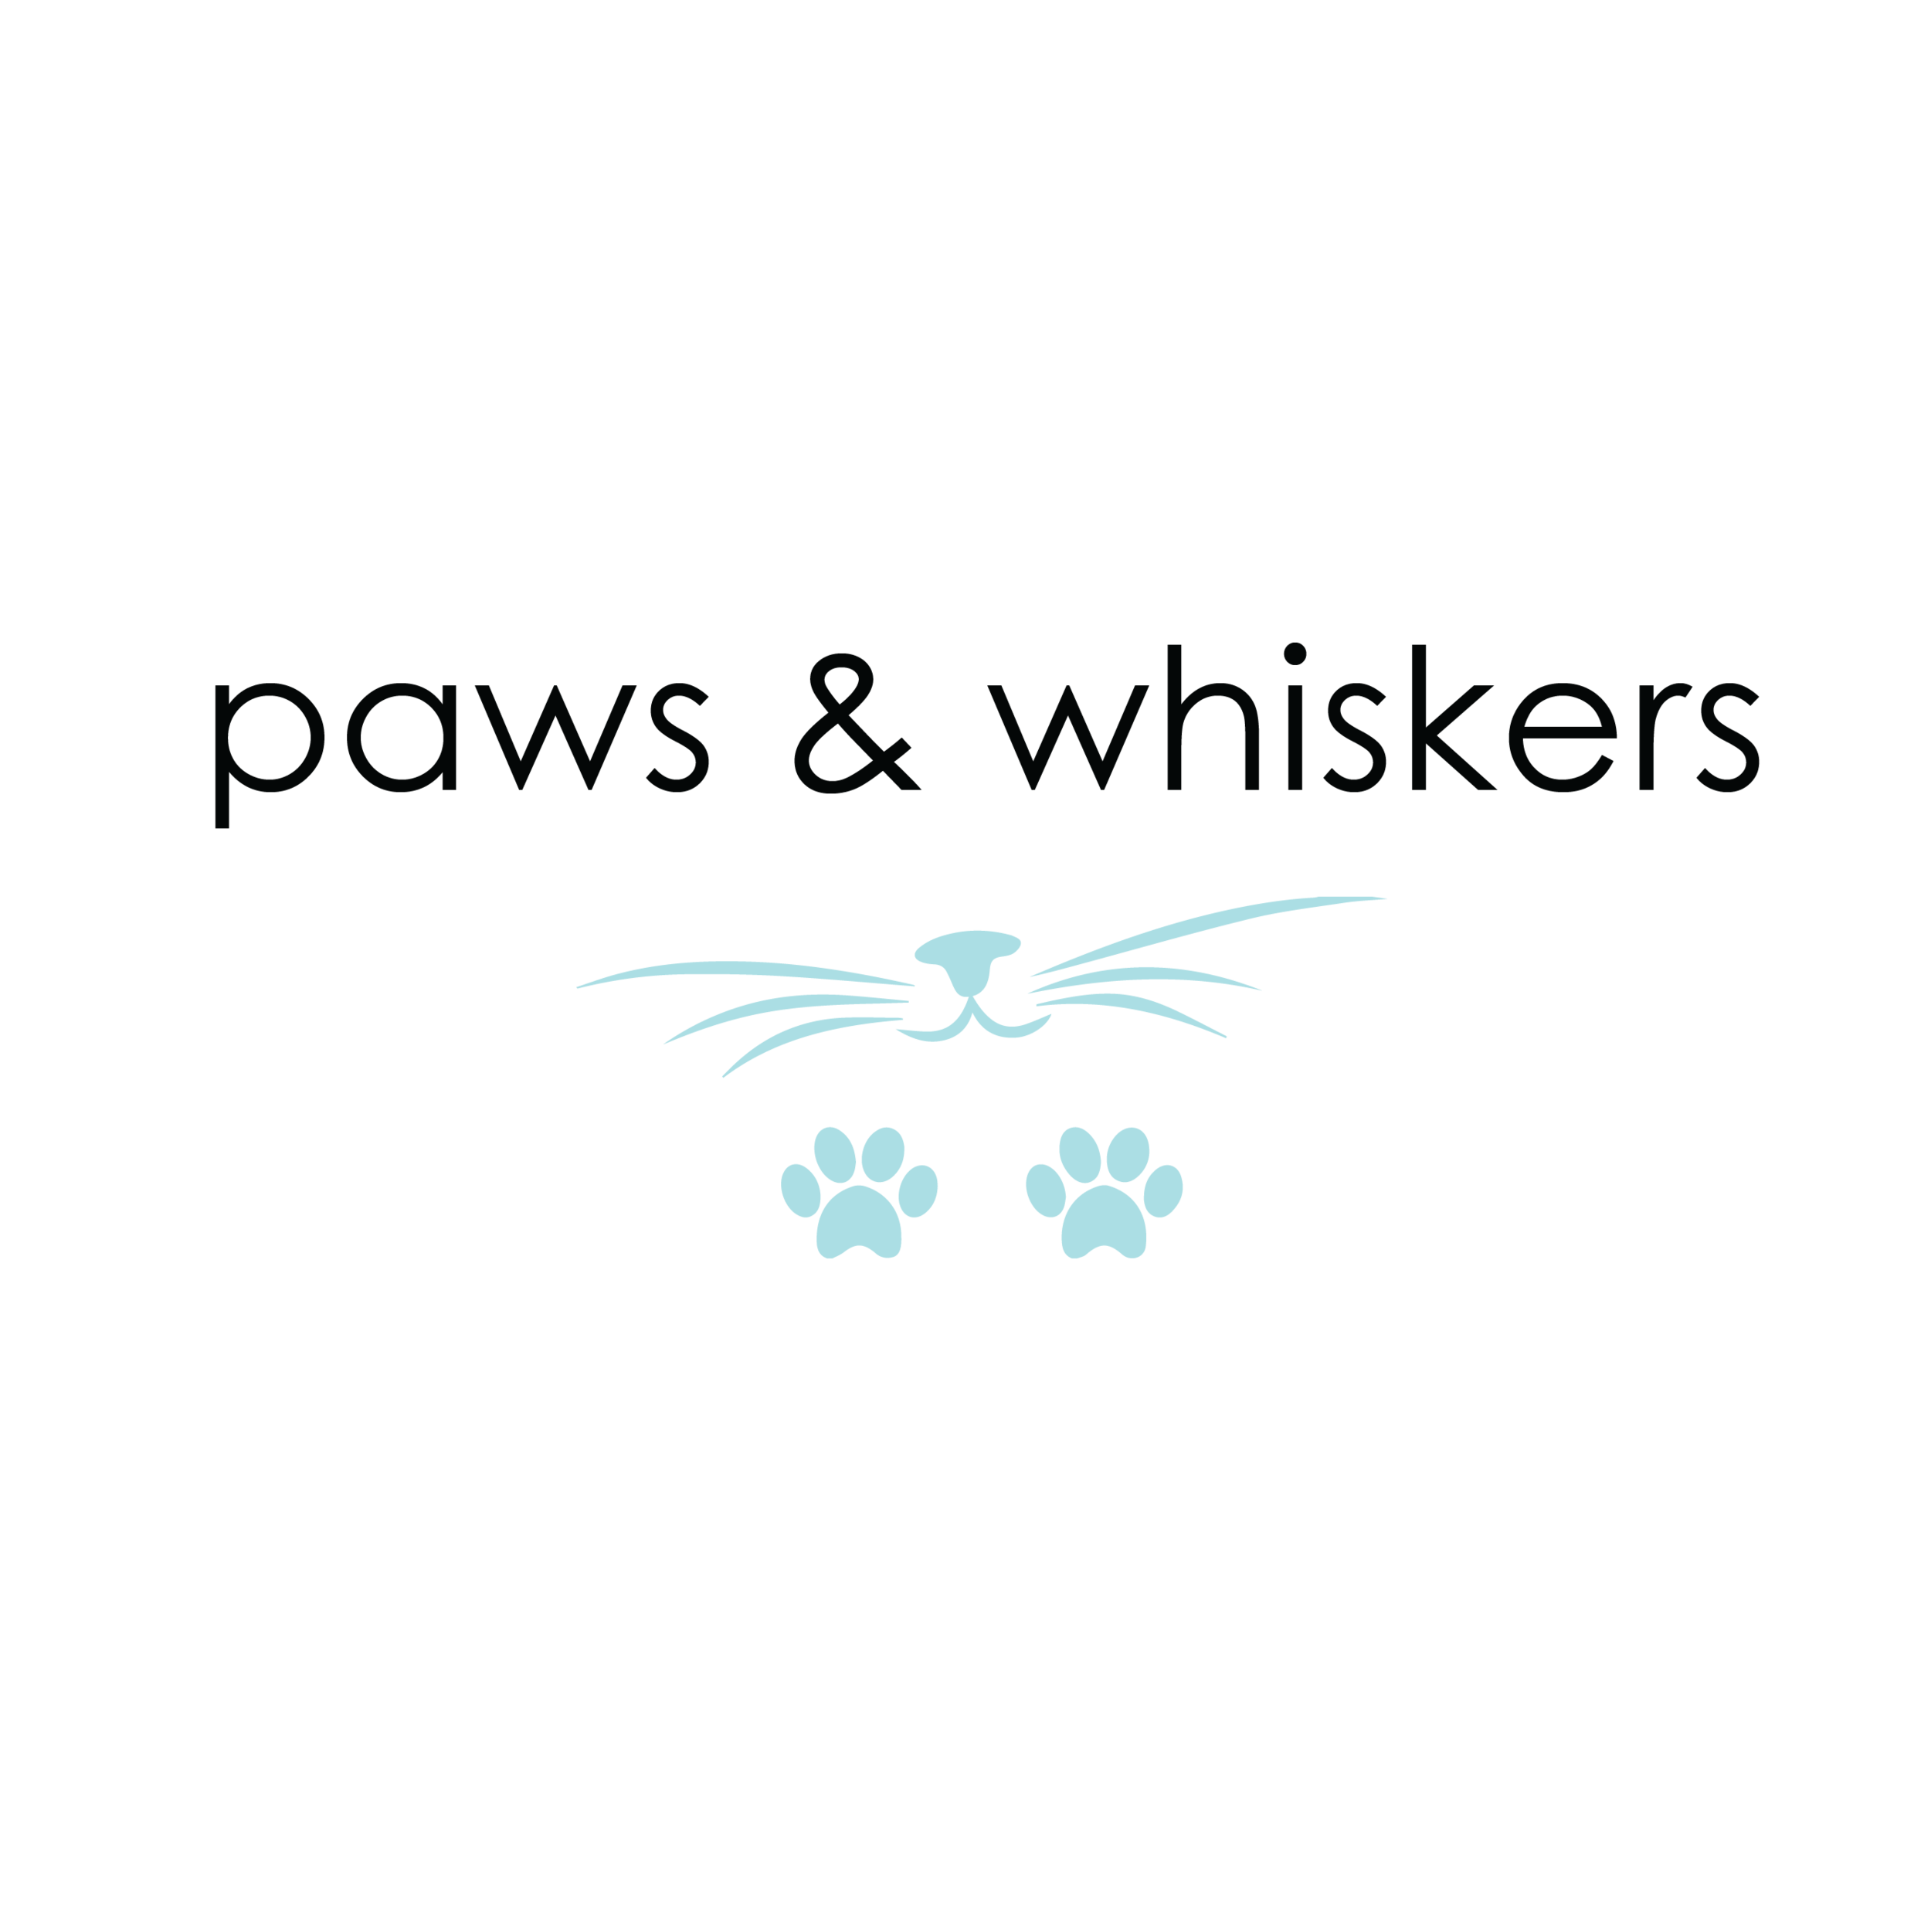 paws and whiskers logo-01.png